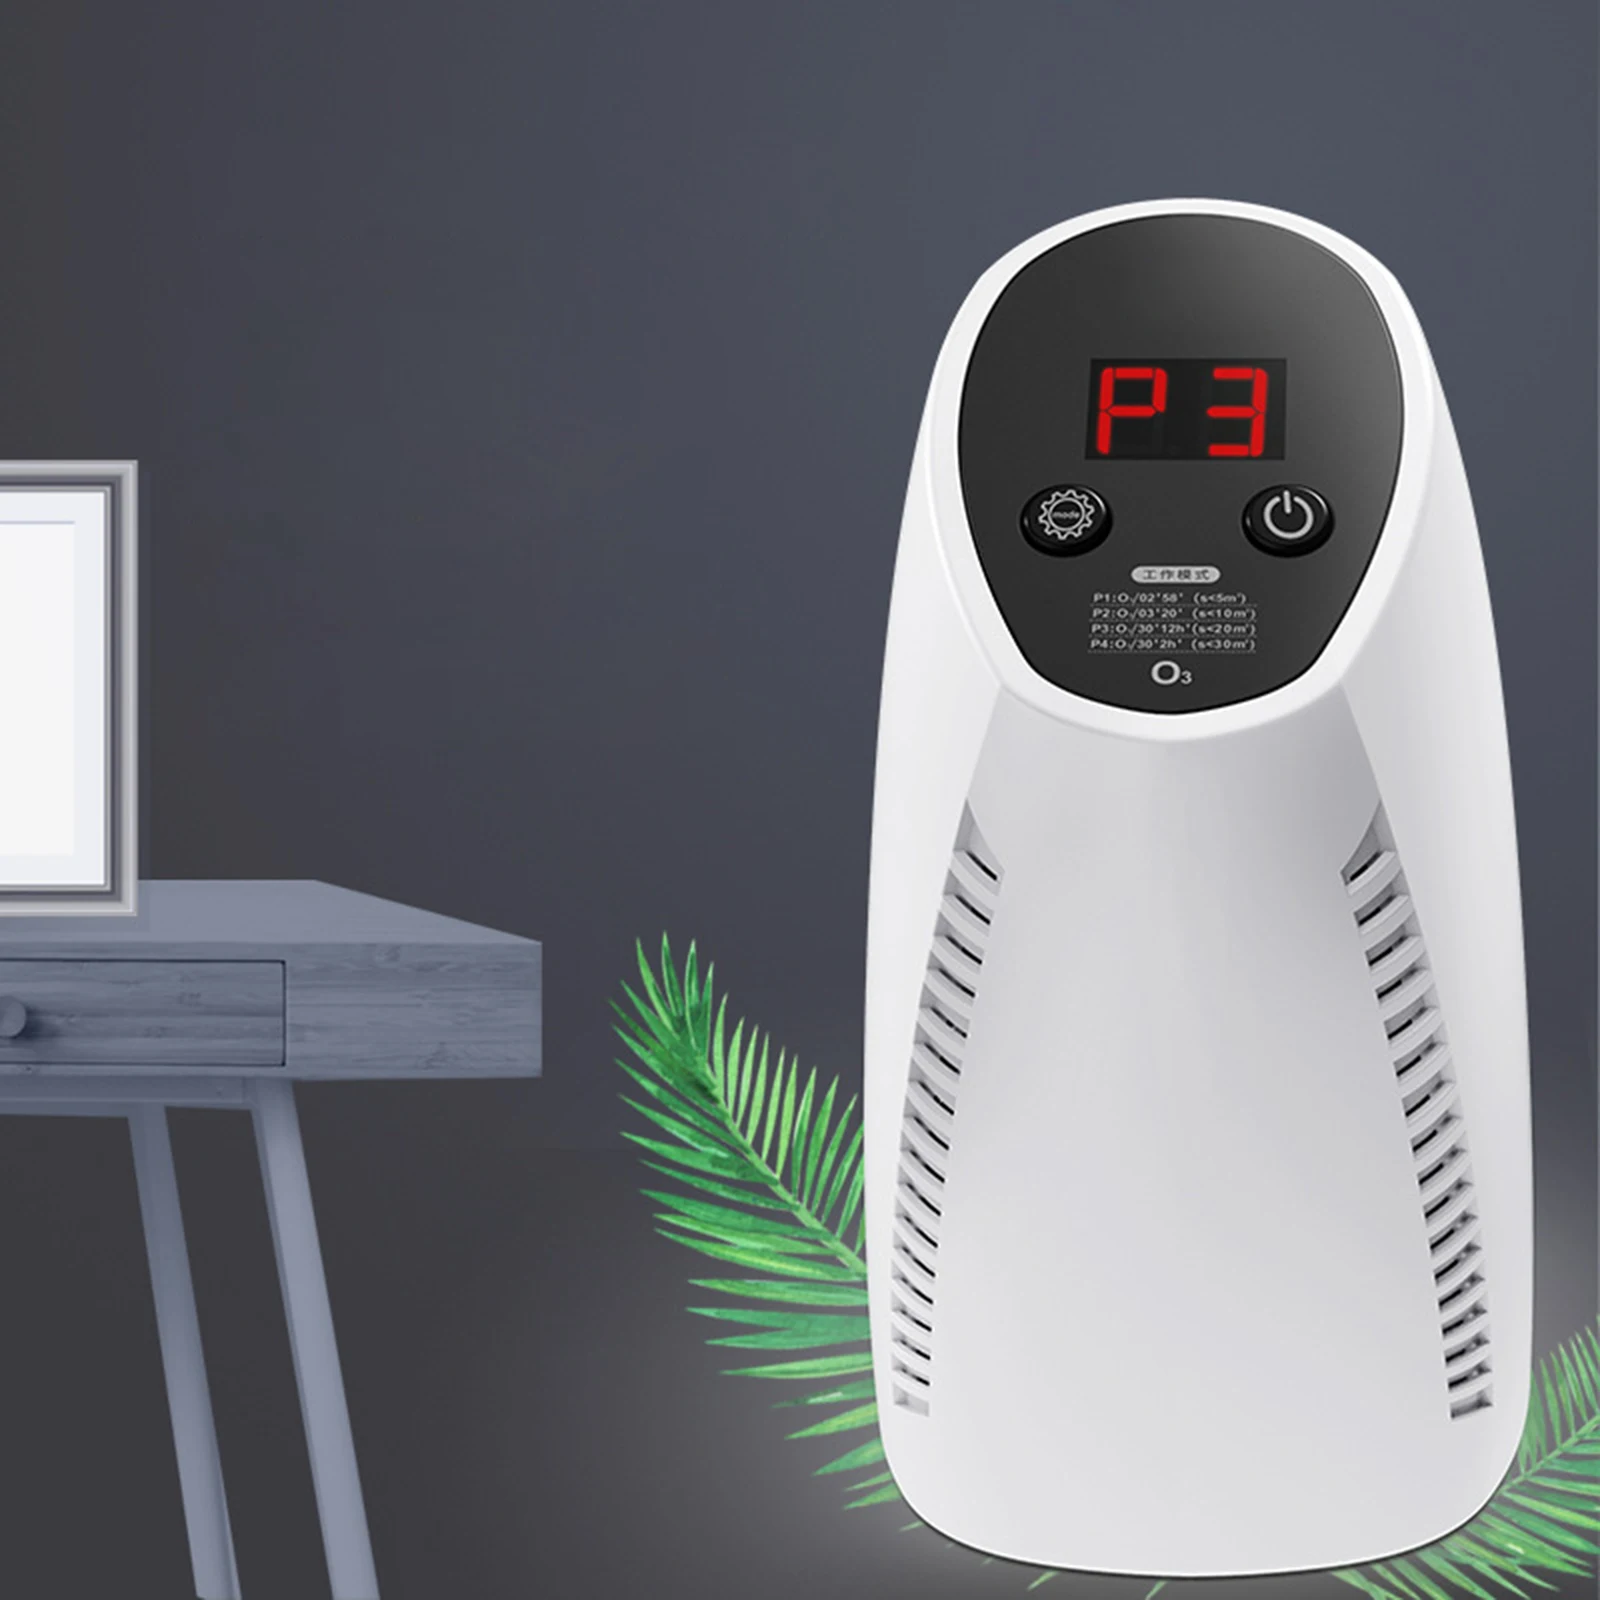 Air Purifier USB Charing Floor/ Wall Mounted Air Cleaner, Particle, Carbon Filter, Allergens, Odors, Smoke, Pets Smell Filters